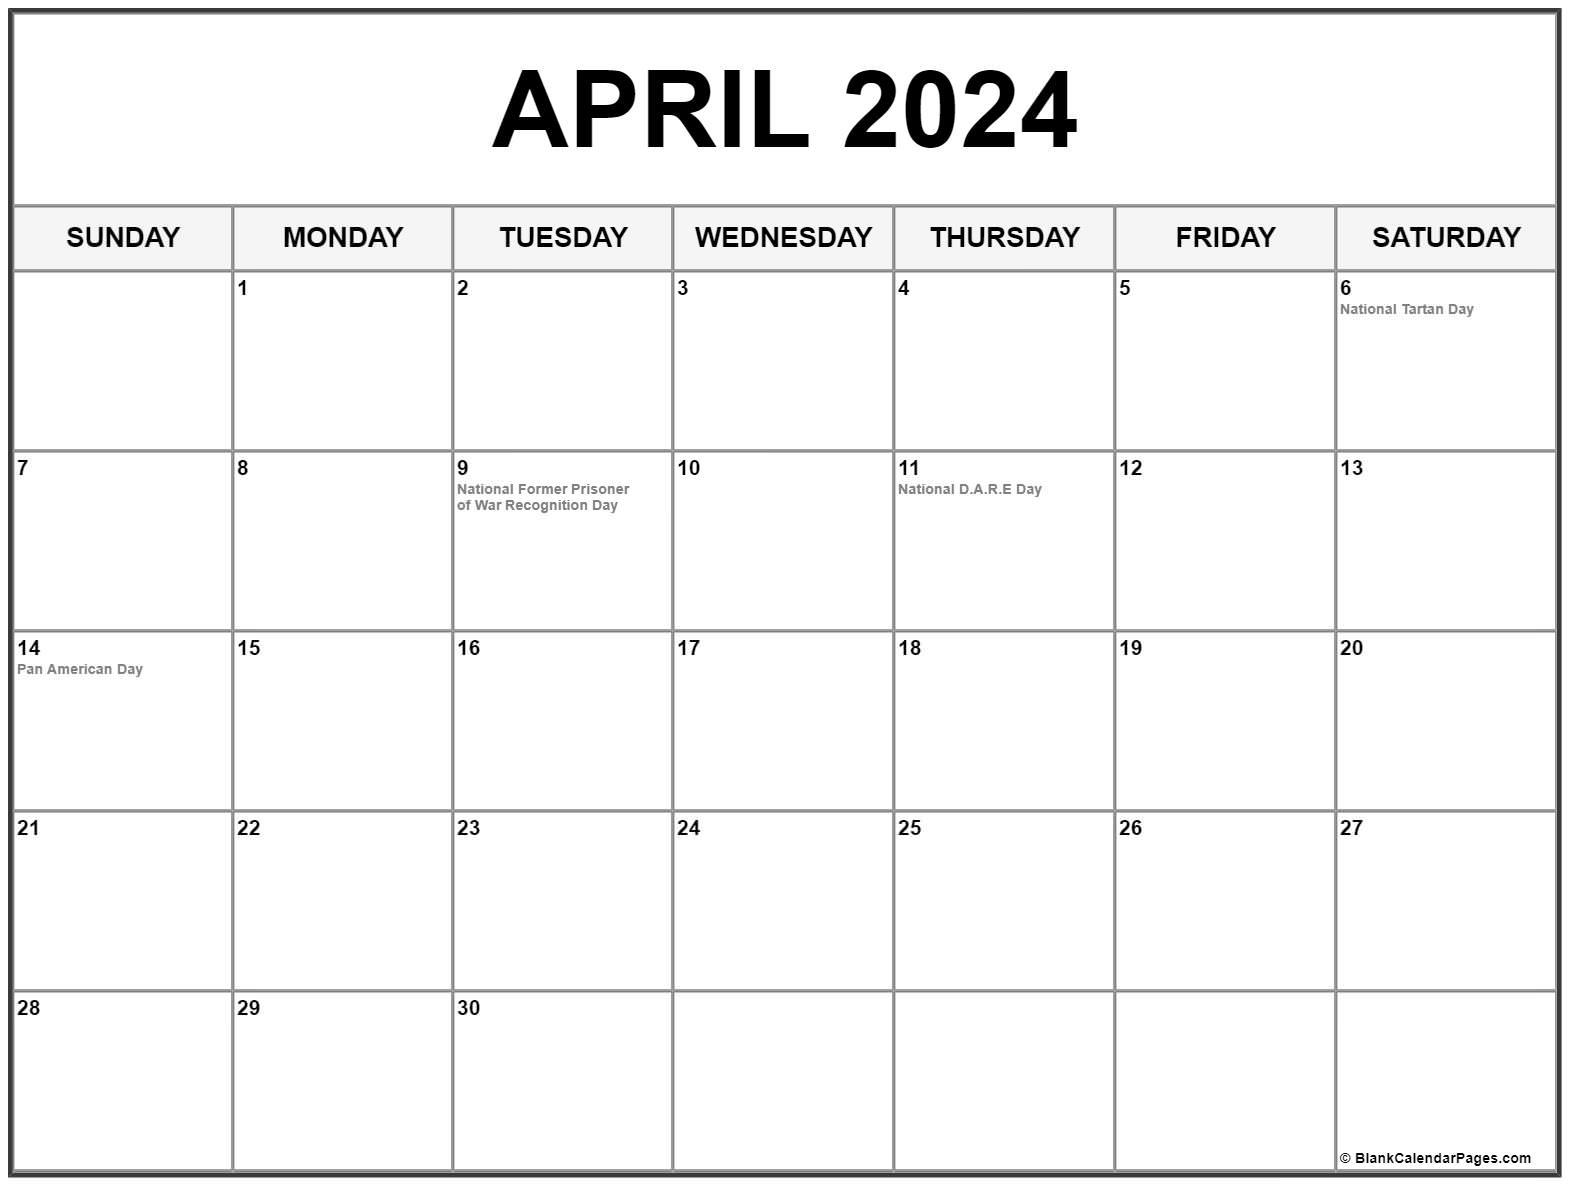 Collection Of April 2018 Calendars With Holidays